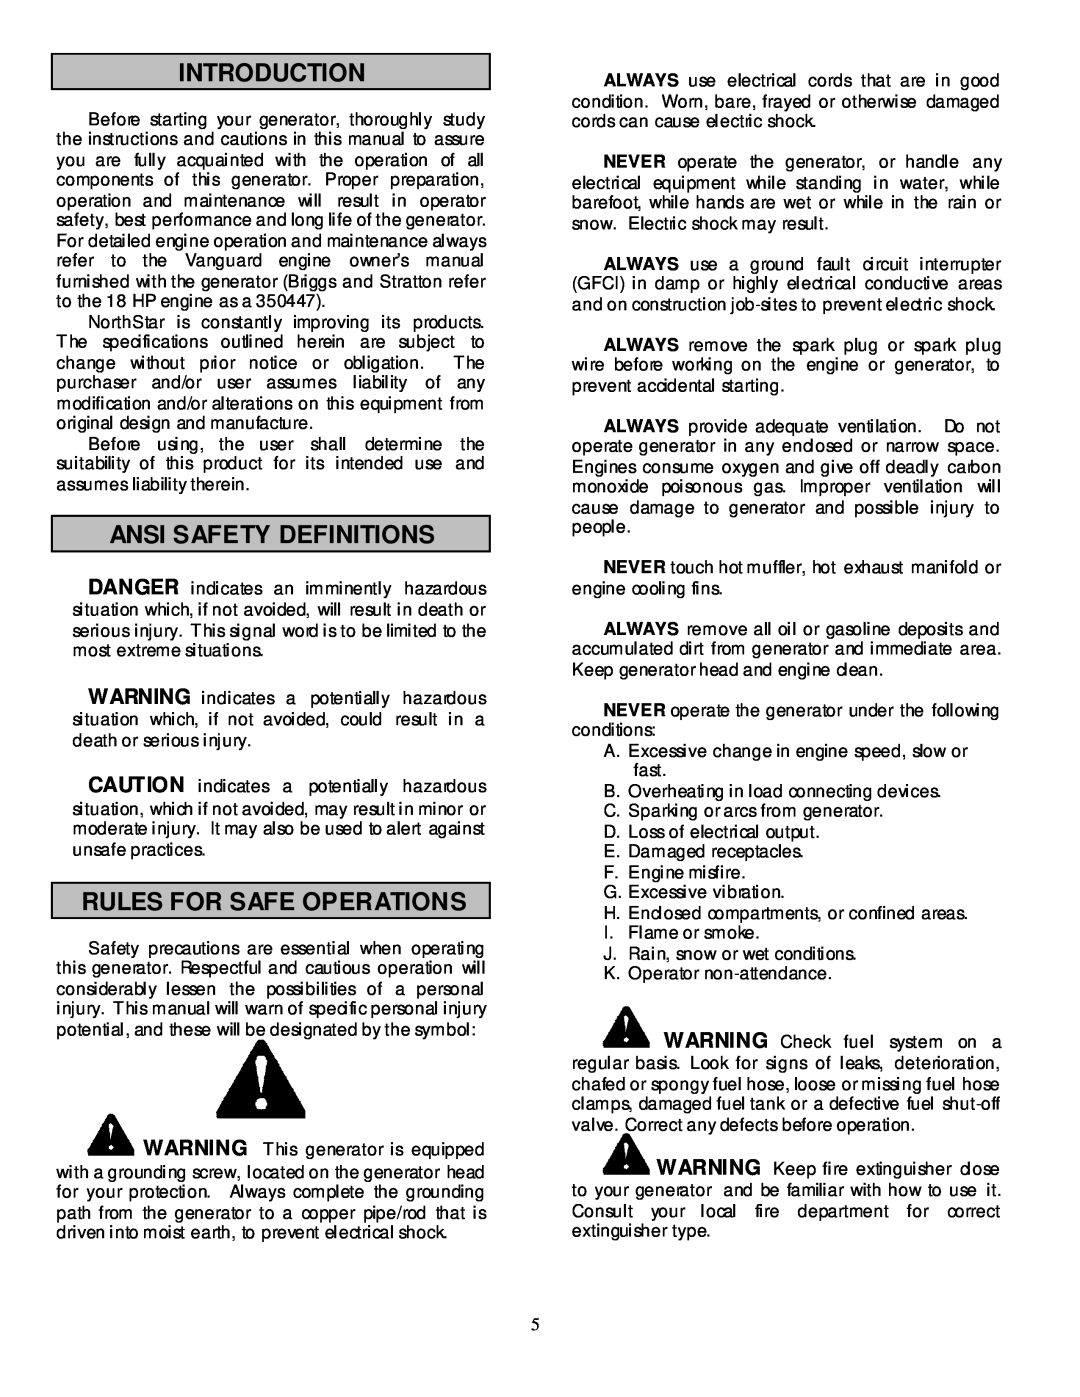 North Star 10000 PPG owner manual Introduction, Ansi Safety Definitions, Rules For Safe Operations 